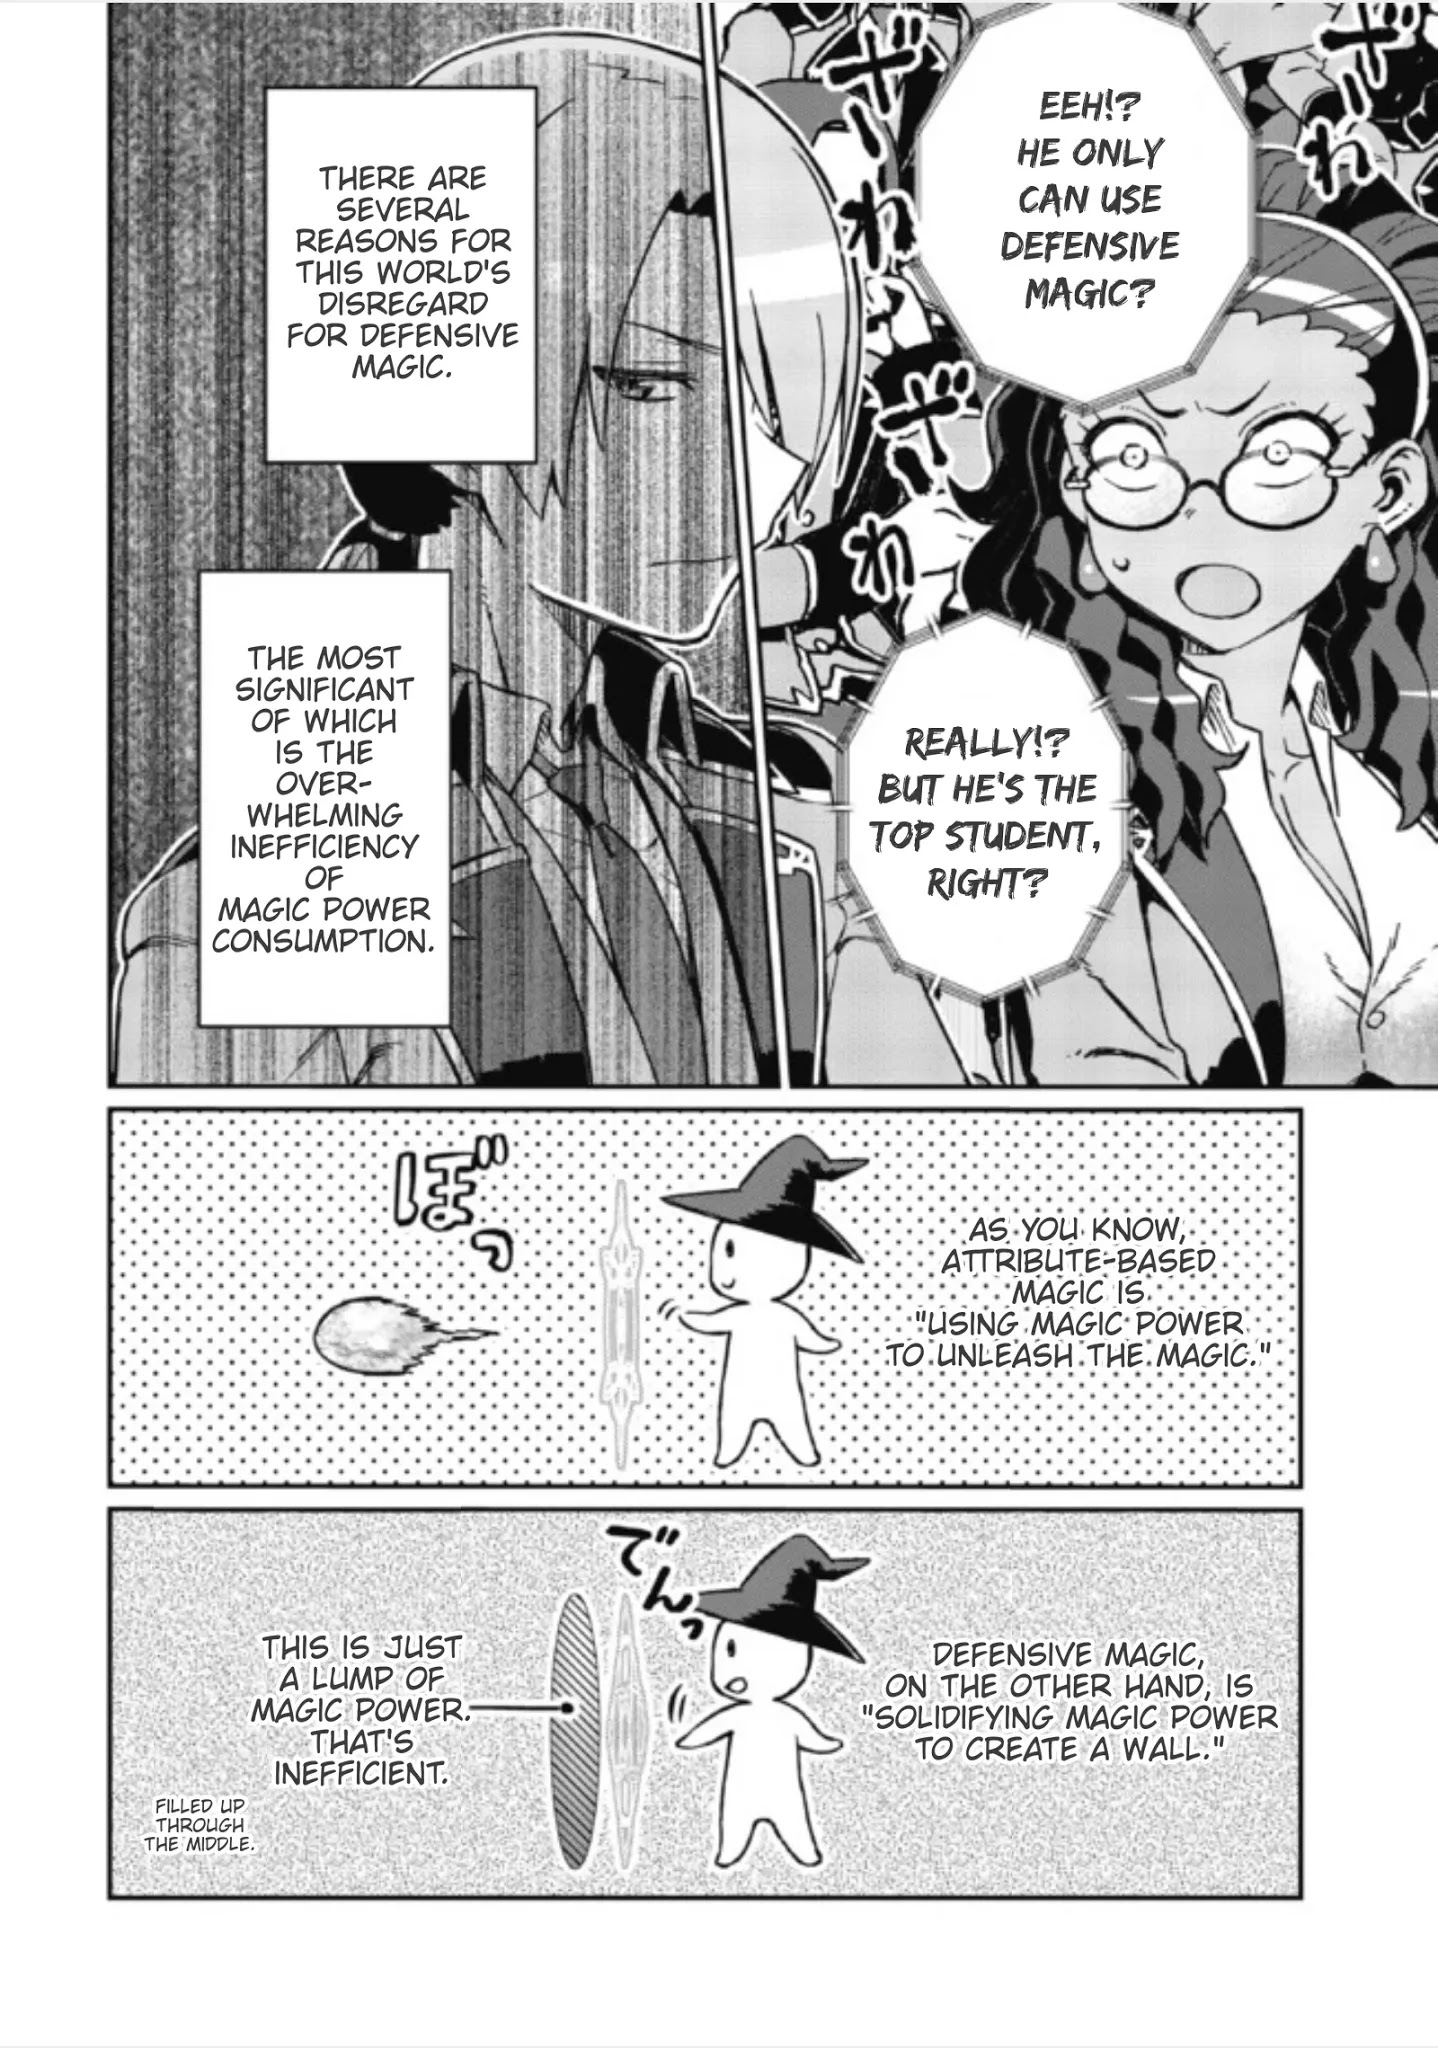 Great Wise Man's Beloved Pupil - Page 3